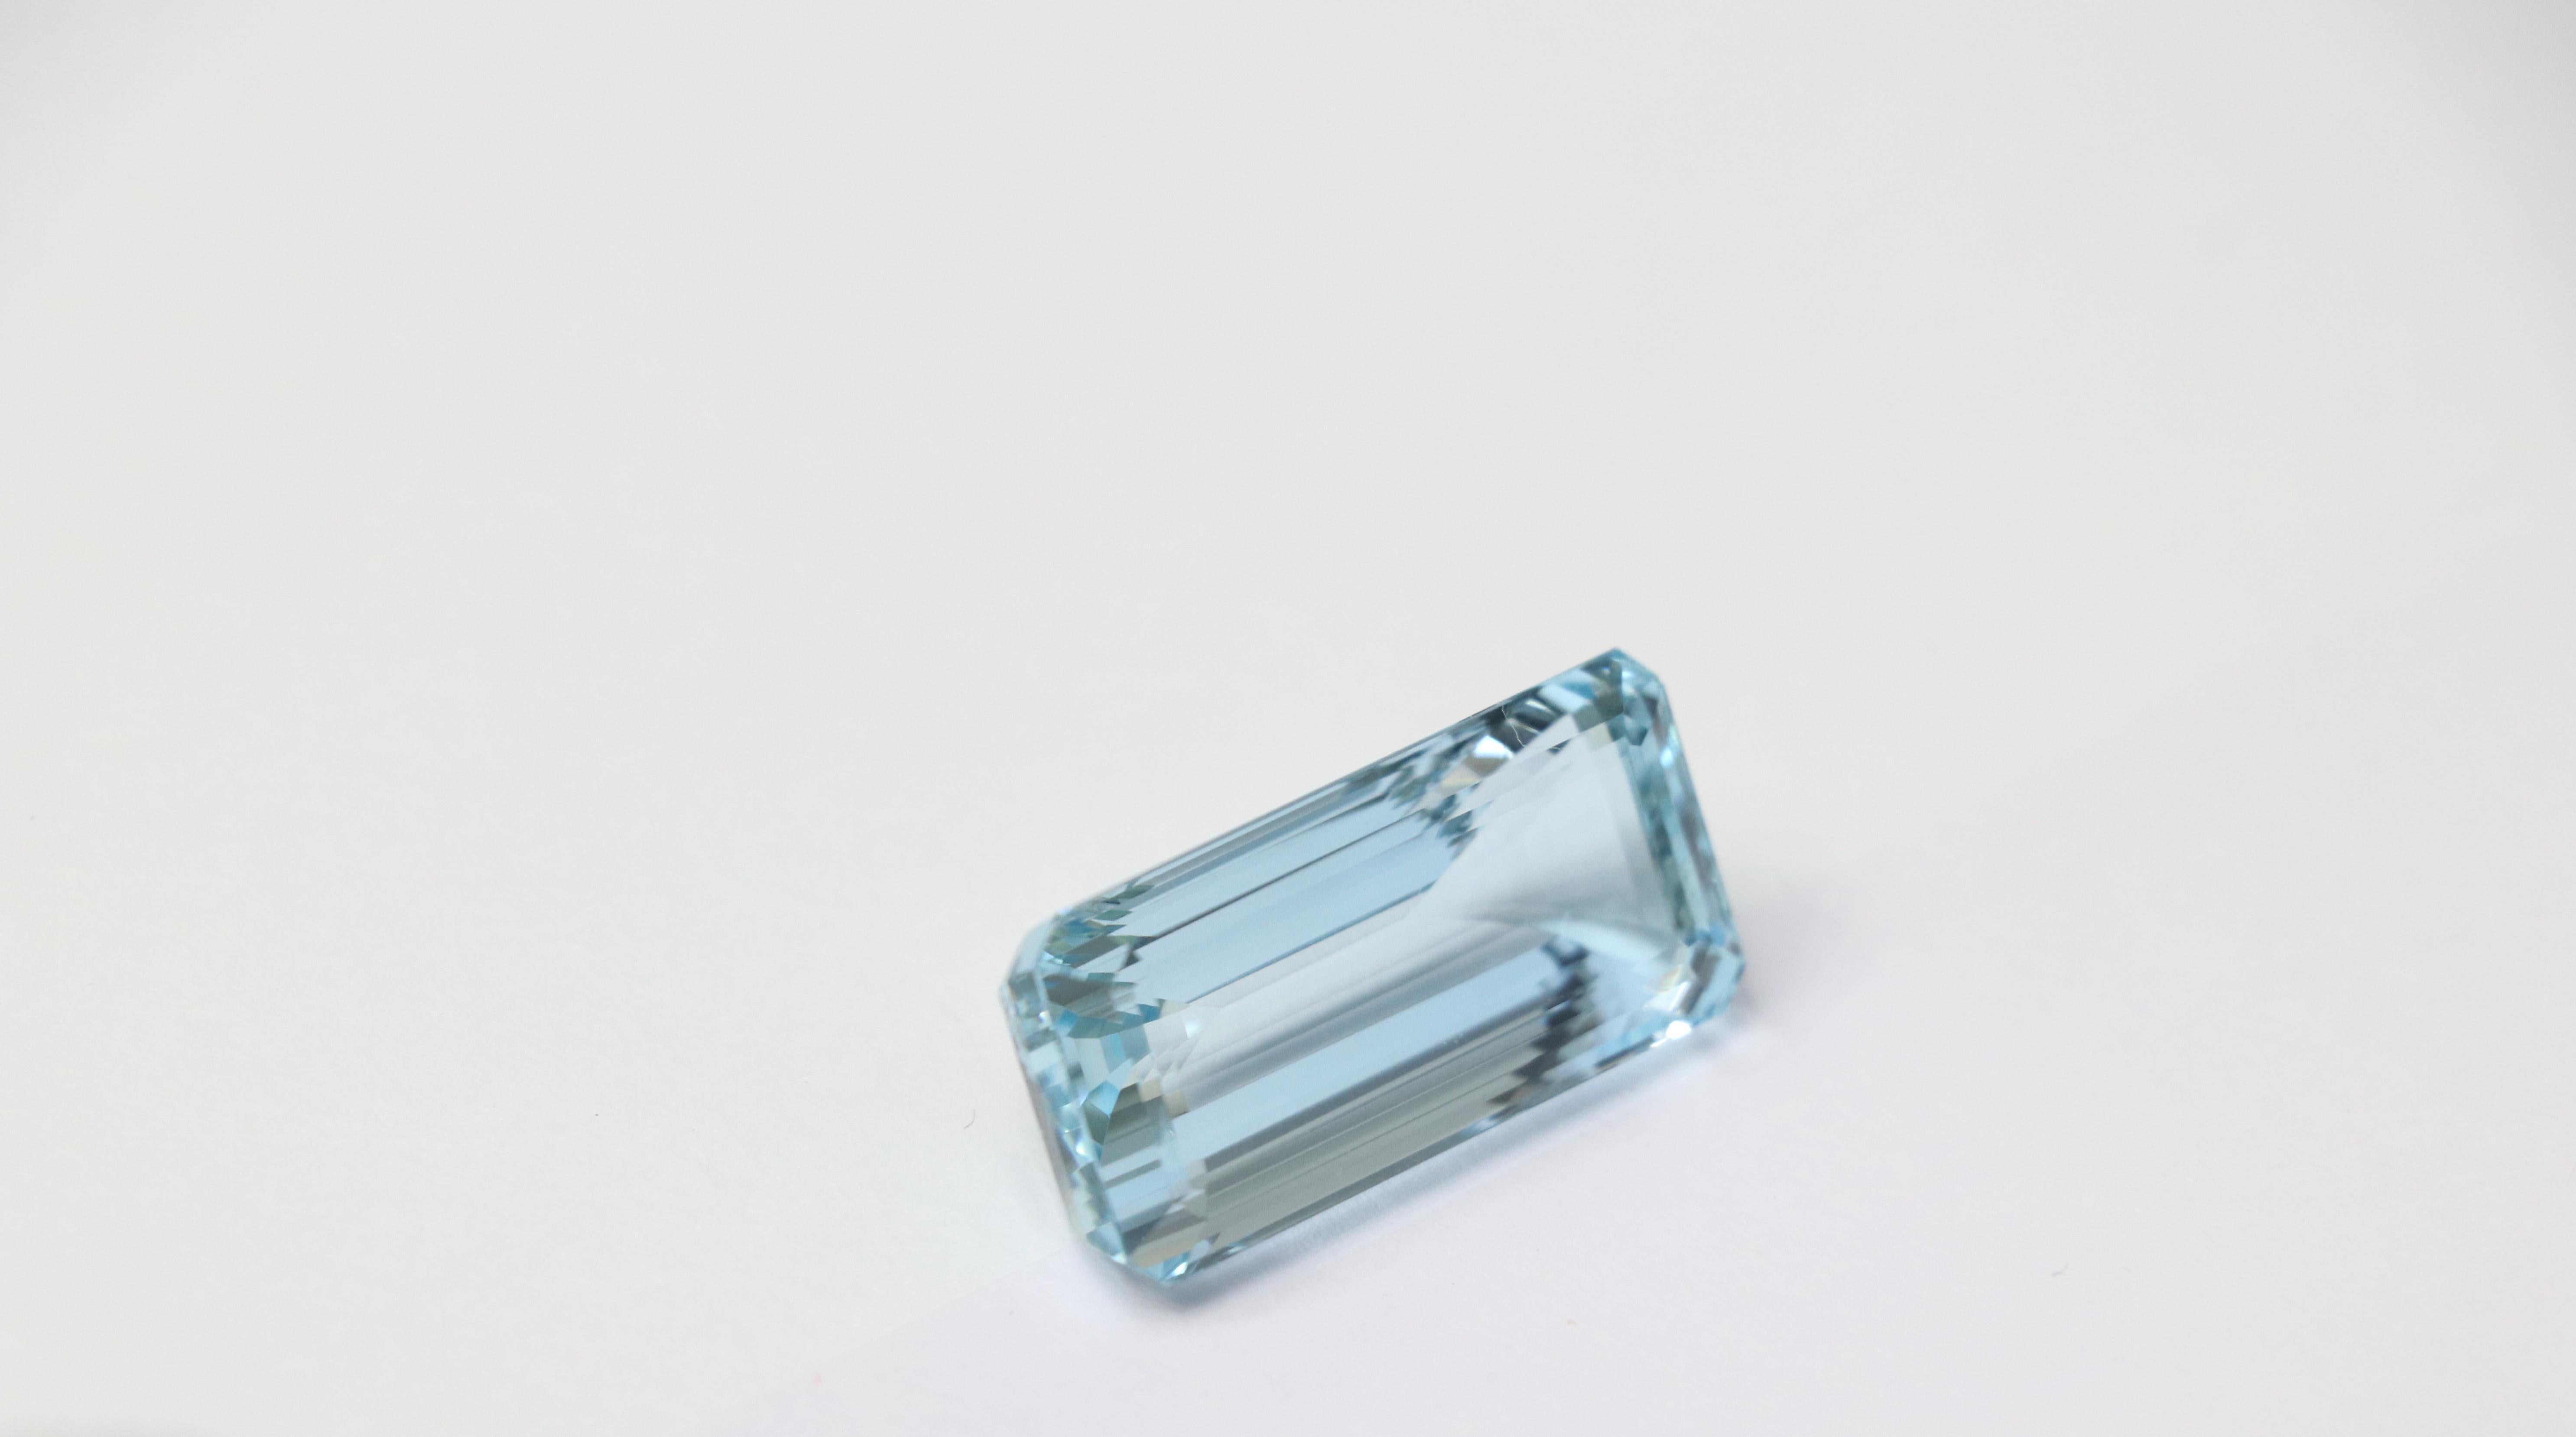 34.25 Carat Aquamarine Emerald-Cut Unset Loose 3-Stone Ring Gemstone

Length: 13.39 mm
Width: 27.57 mm
Height: 11 mm

Note:
We can make any custom jewelry piece with this aquamarine.
Laboratory Certification can be done on request.
Certificate of